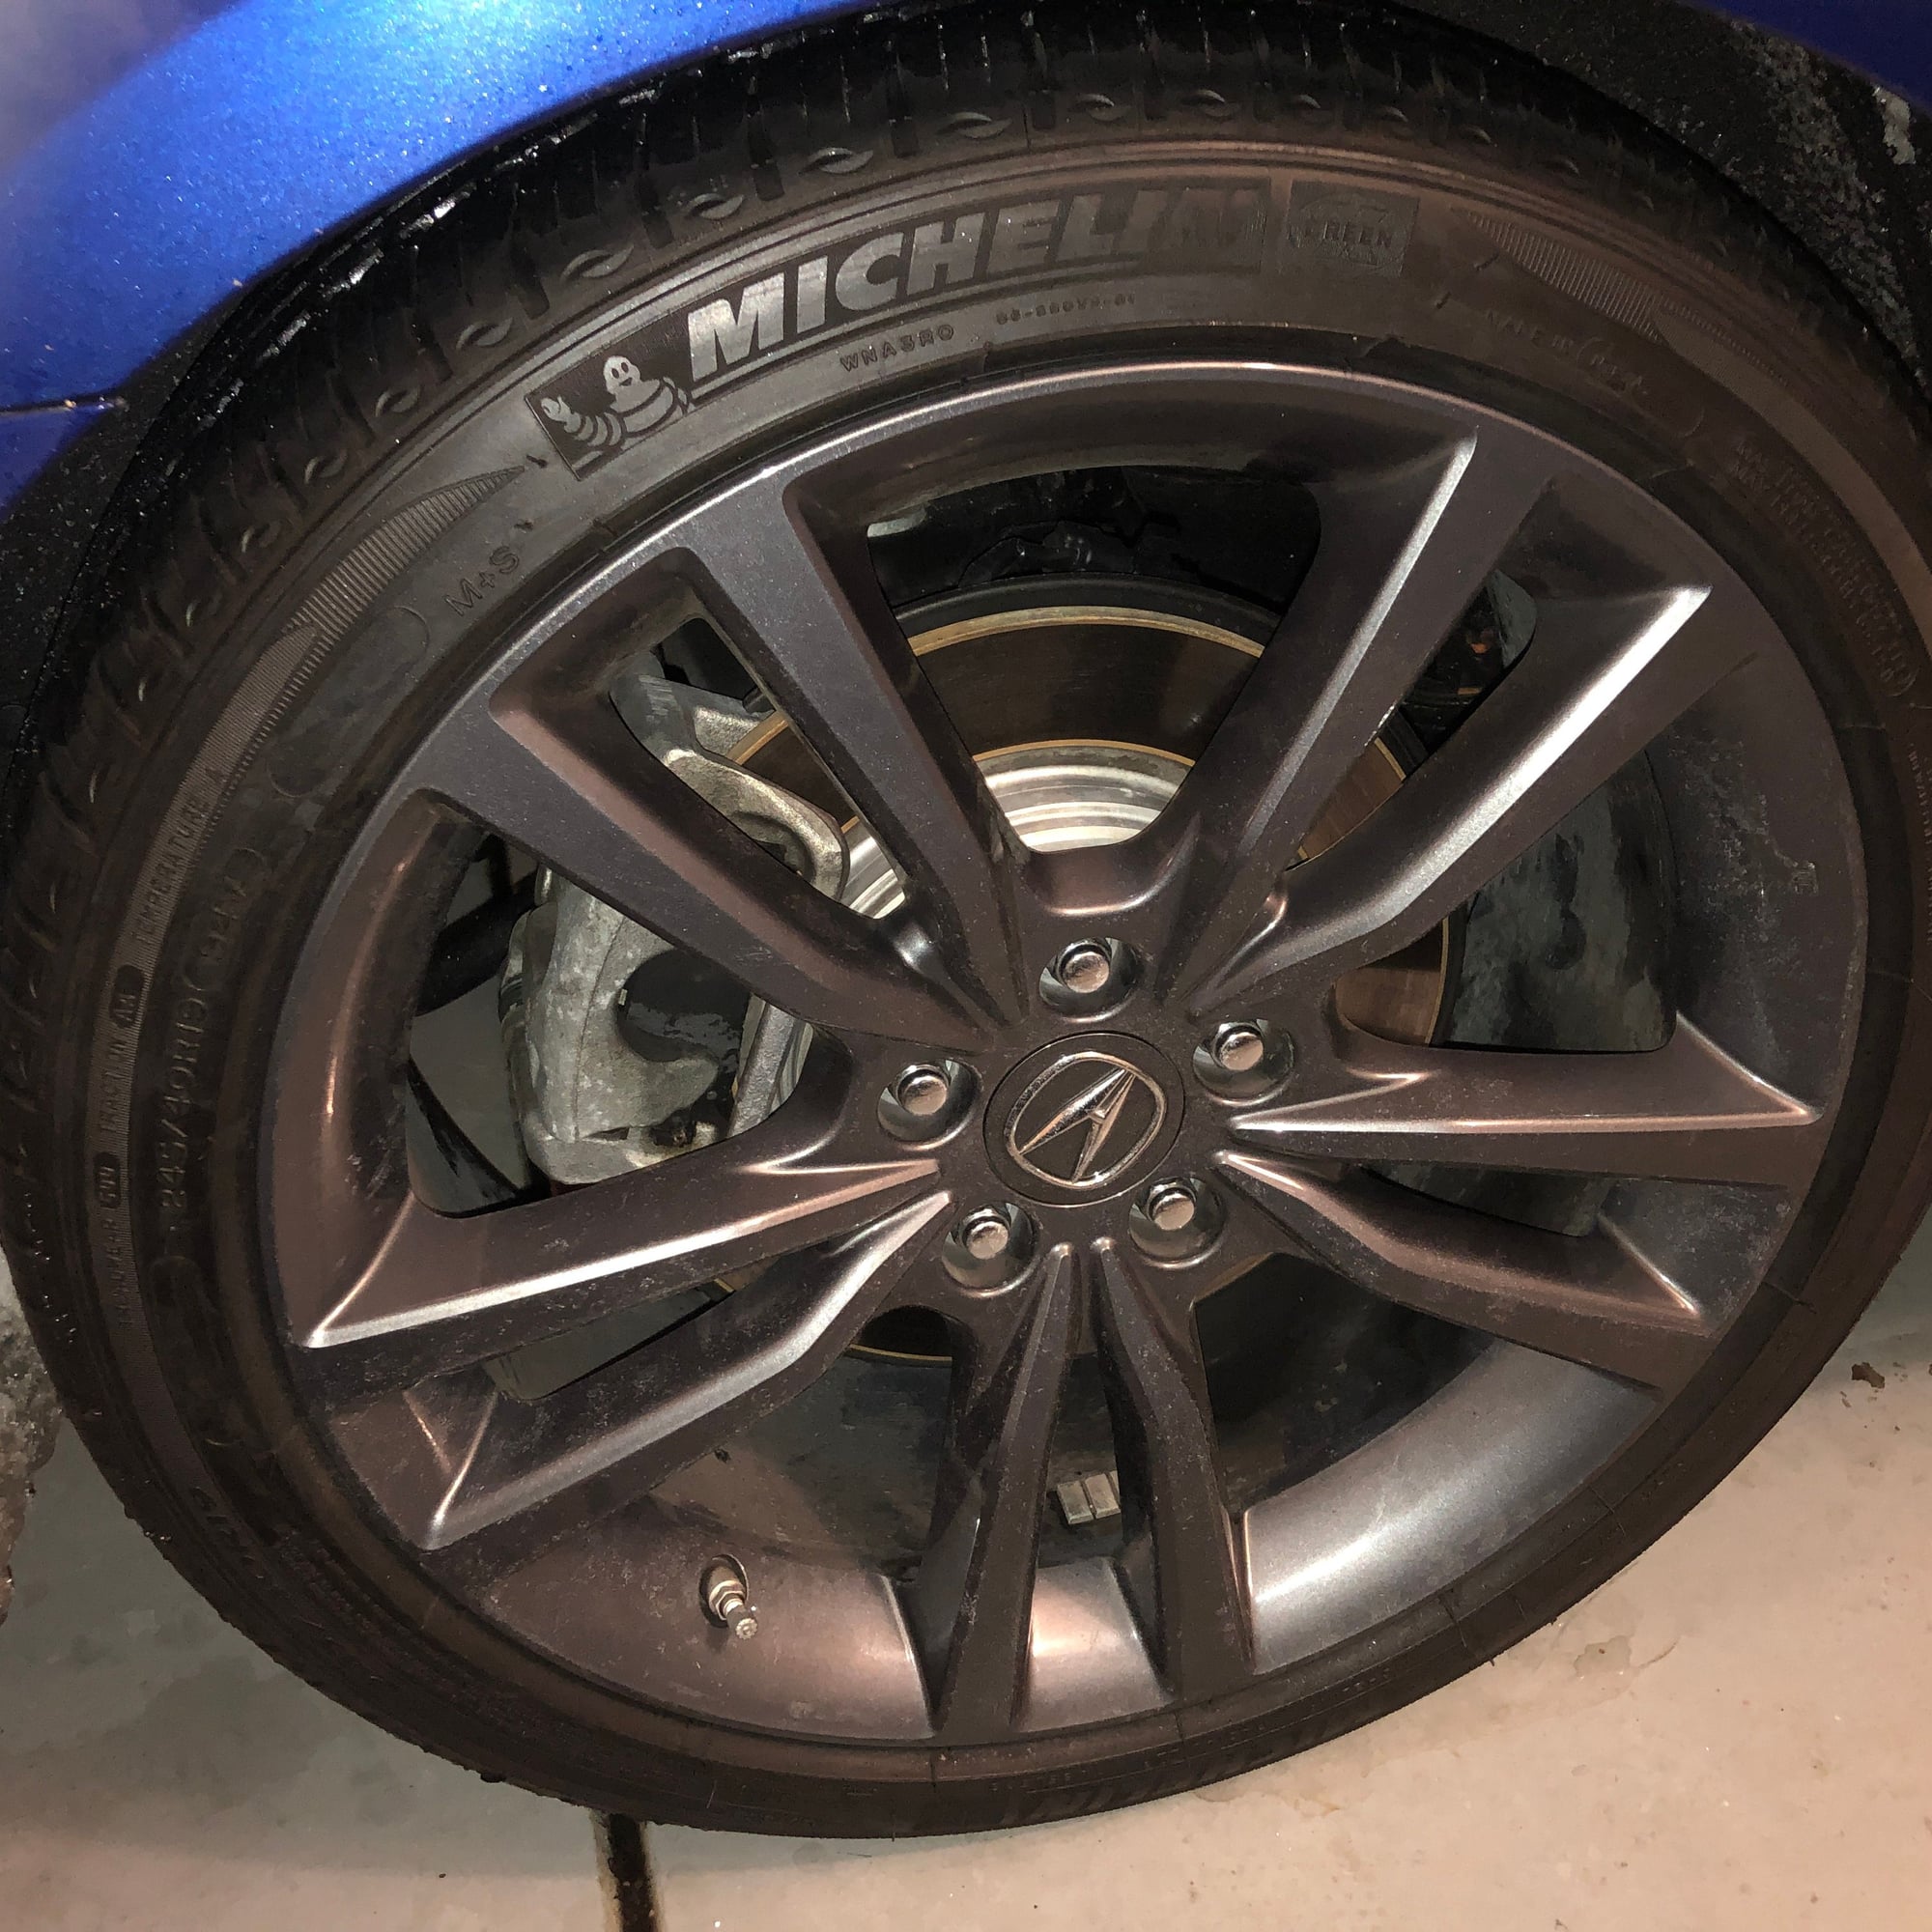 Wheels and Tires/Axles - SOLD: 2018 Tlx Aspec wheels and tires - Used - 2015 to 2019 Acura TLX - St Charles, IL 60175, United States